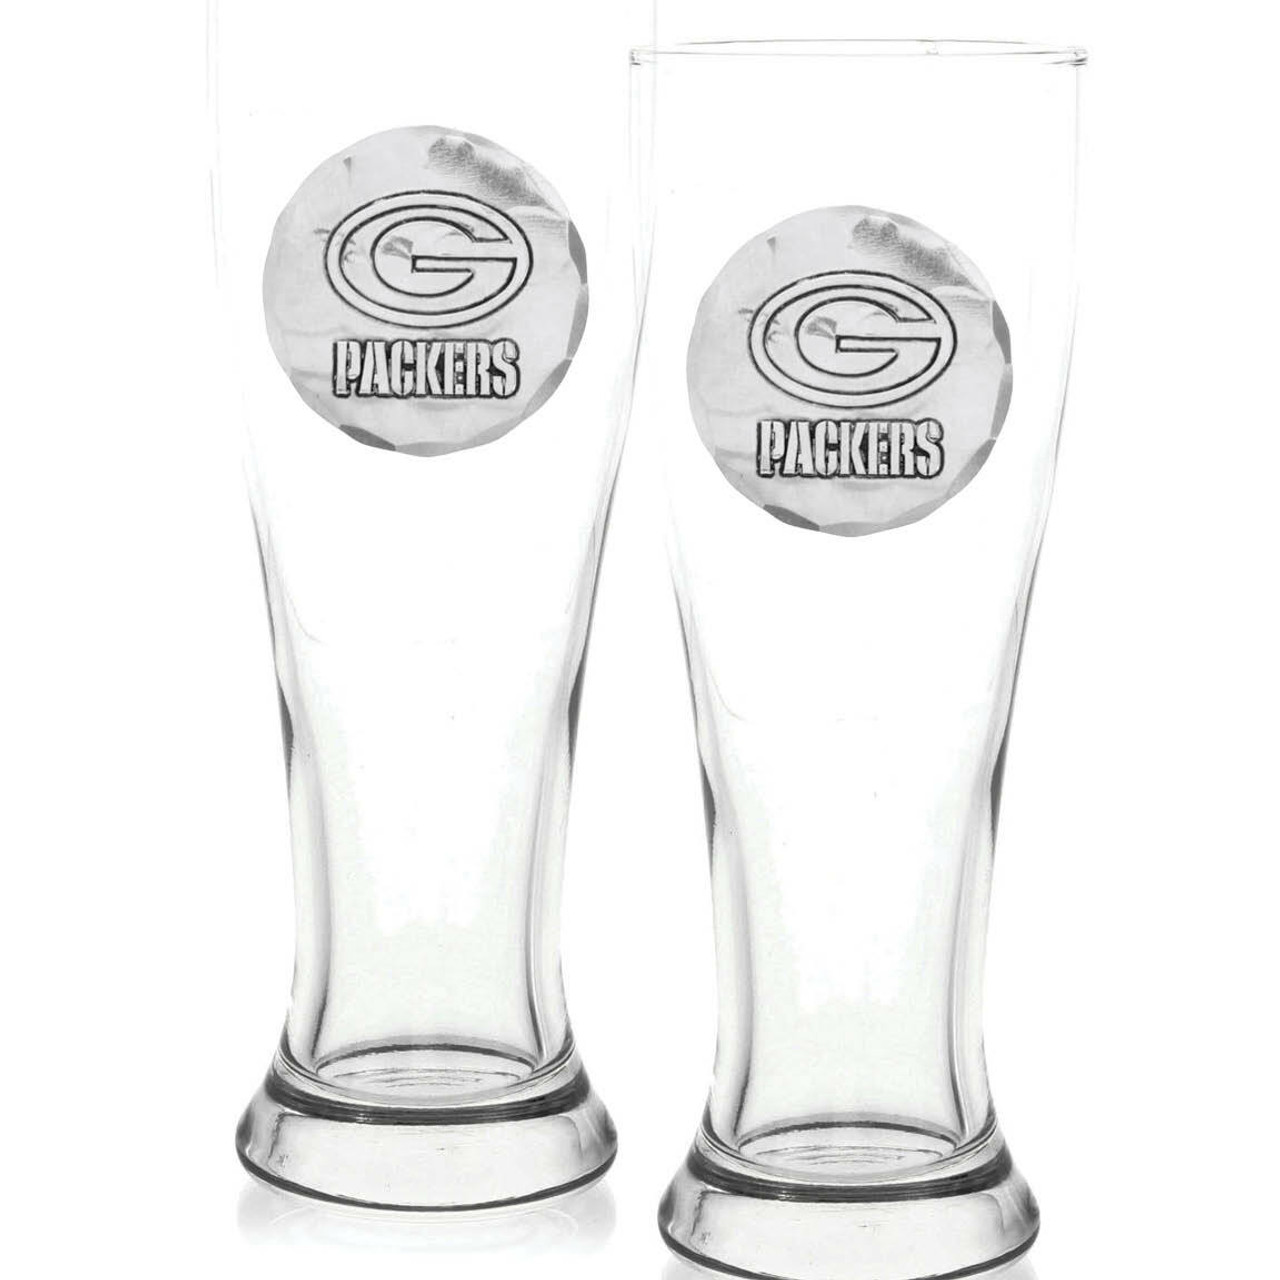 GREAT AMERICAN Green Bay Packers Stainless Steel Black Bottle/Can